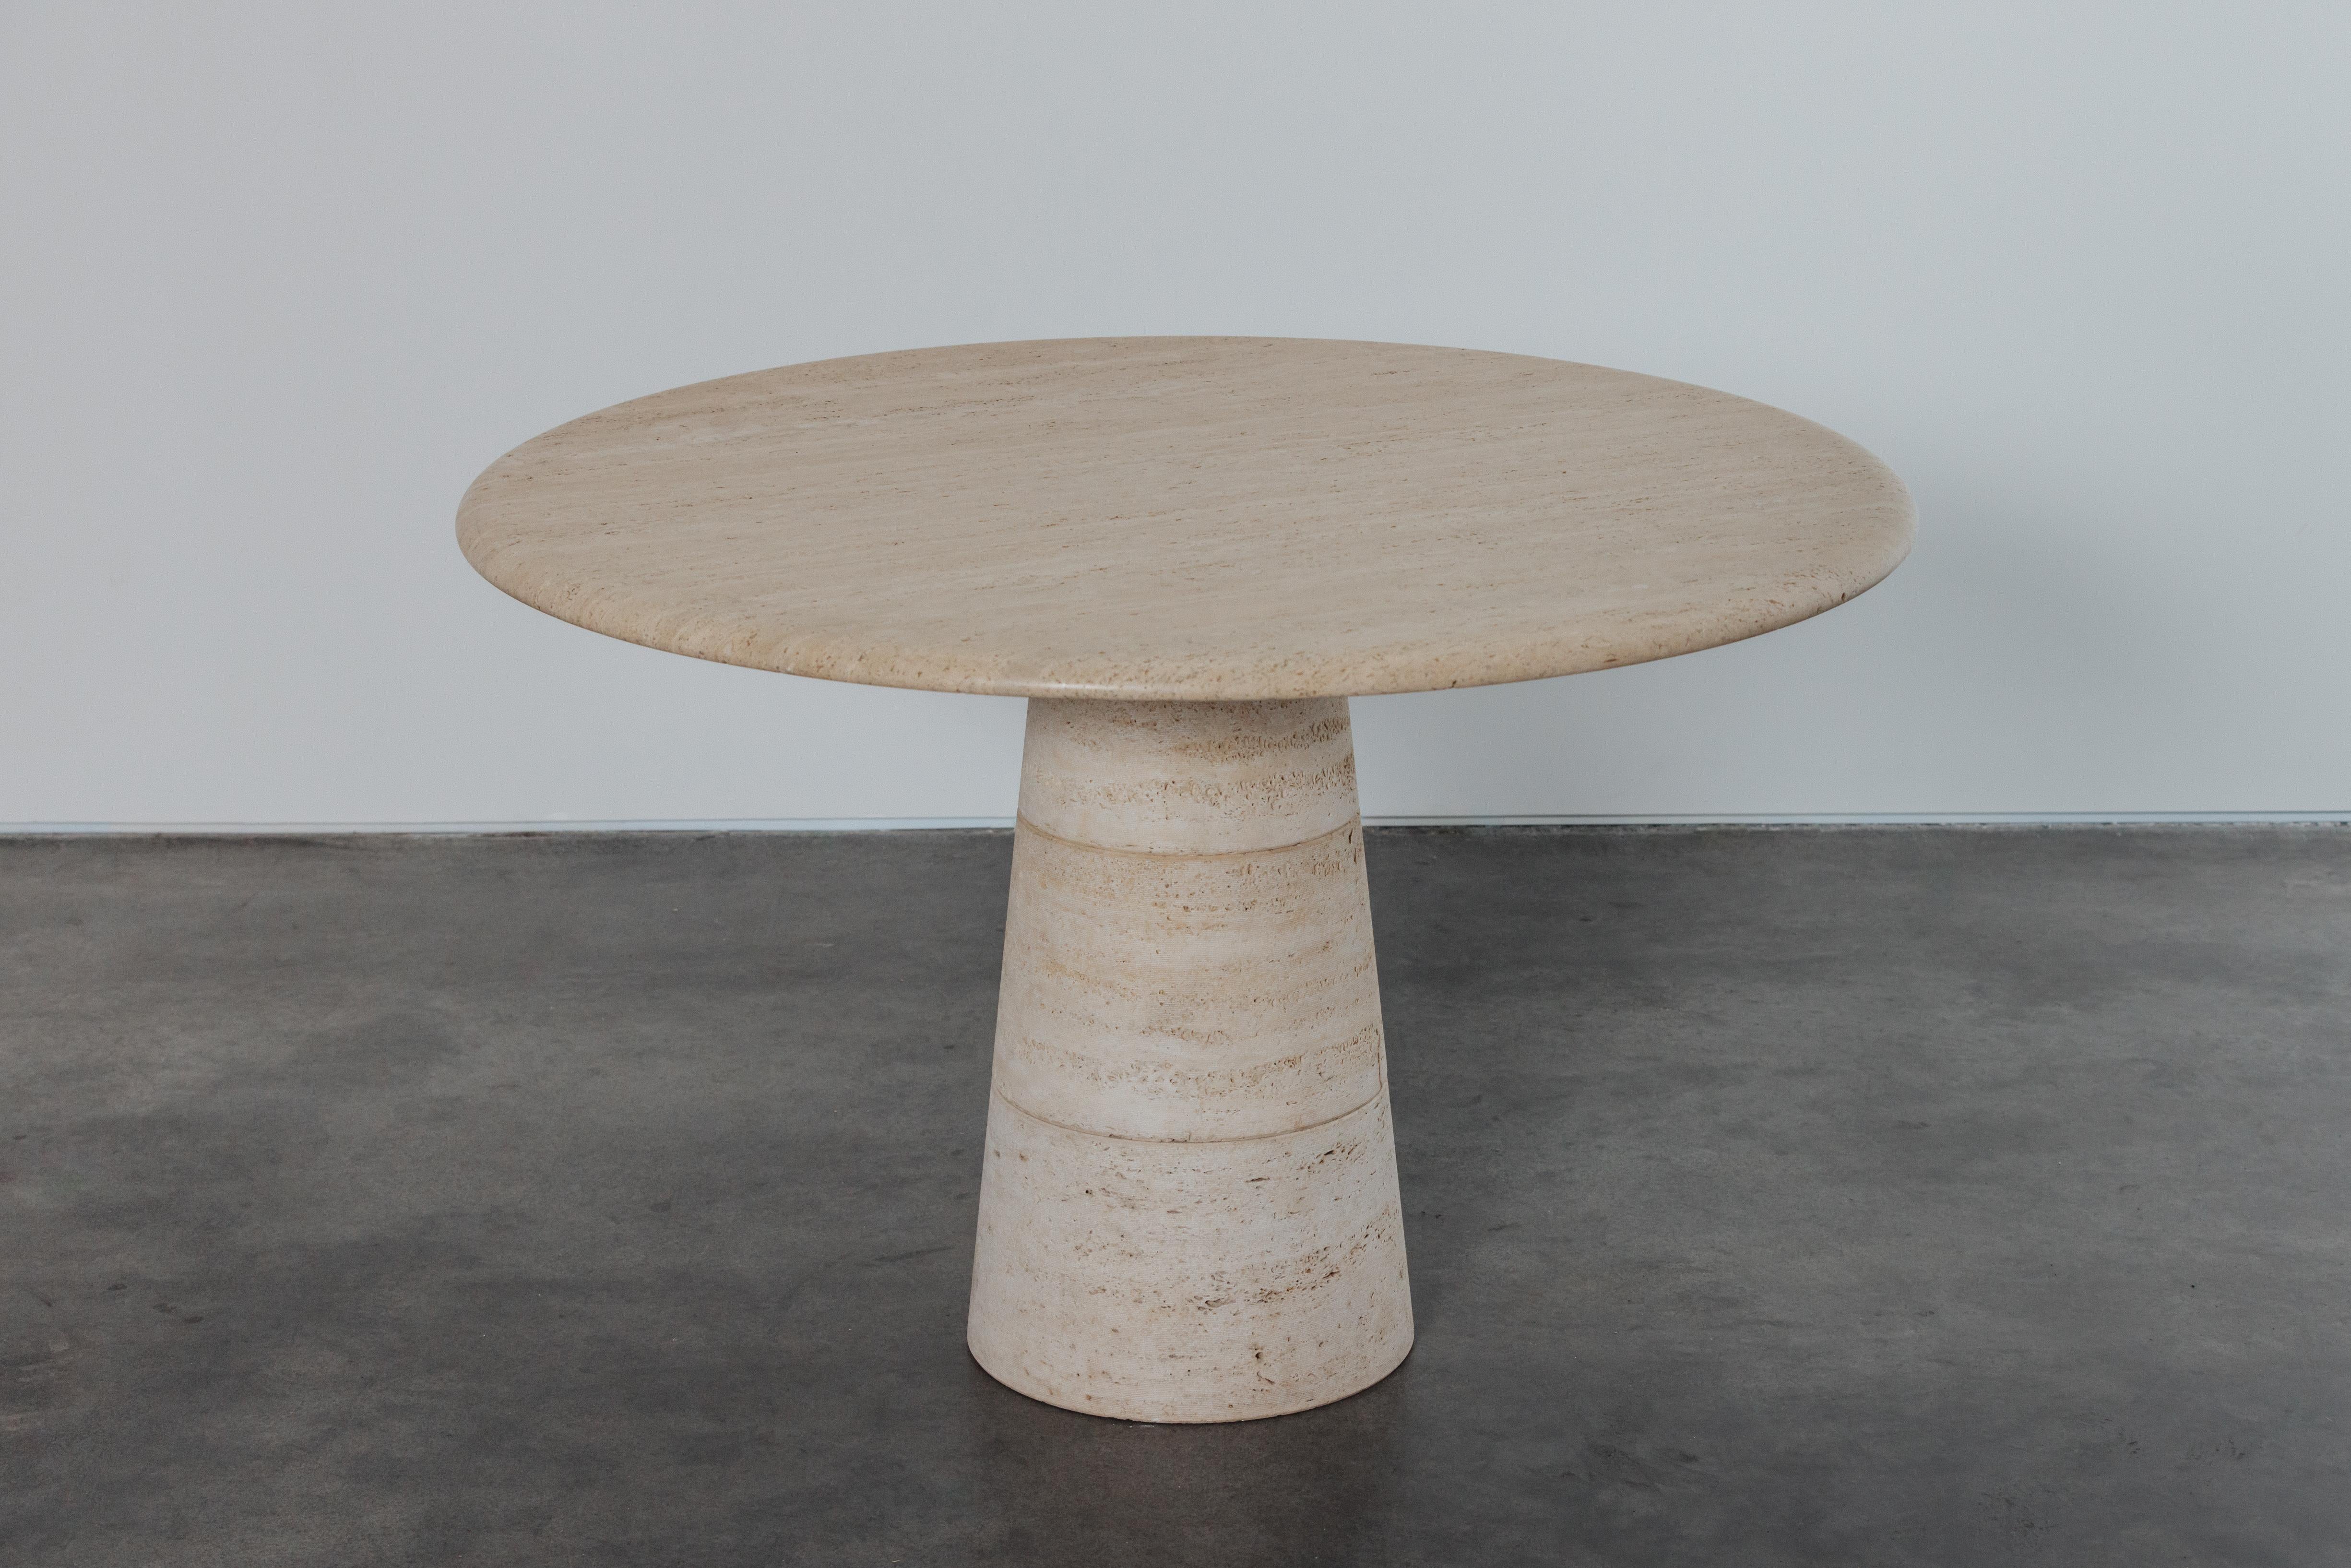 Vintage Travertine Dining Table From France, Circa 1970.  Solid travertine top.  Base in three interlocking sections.  